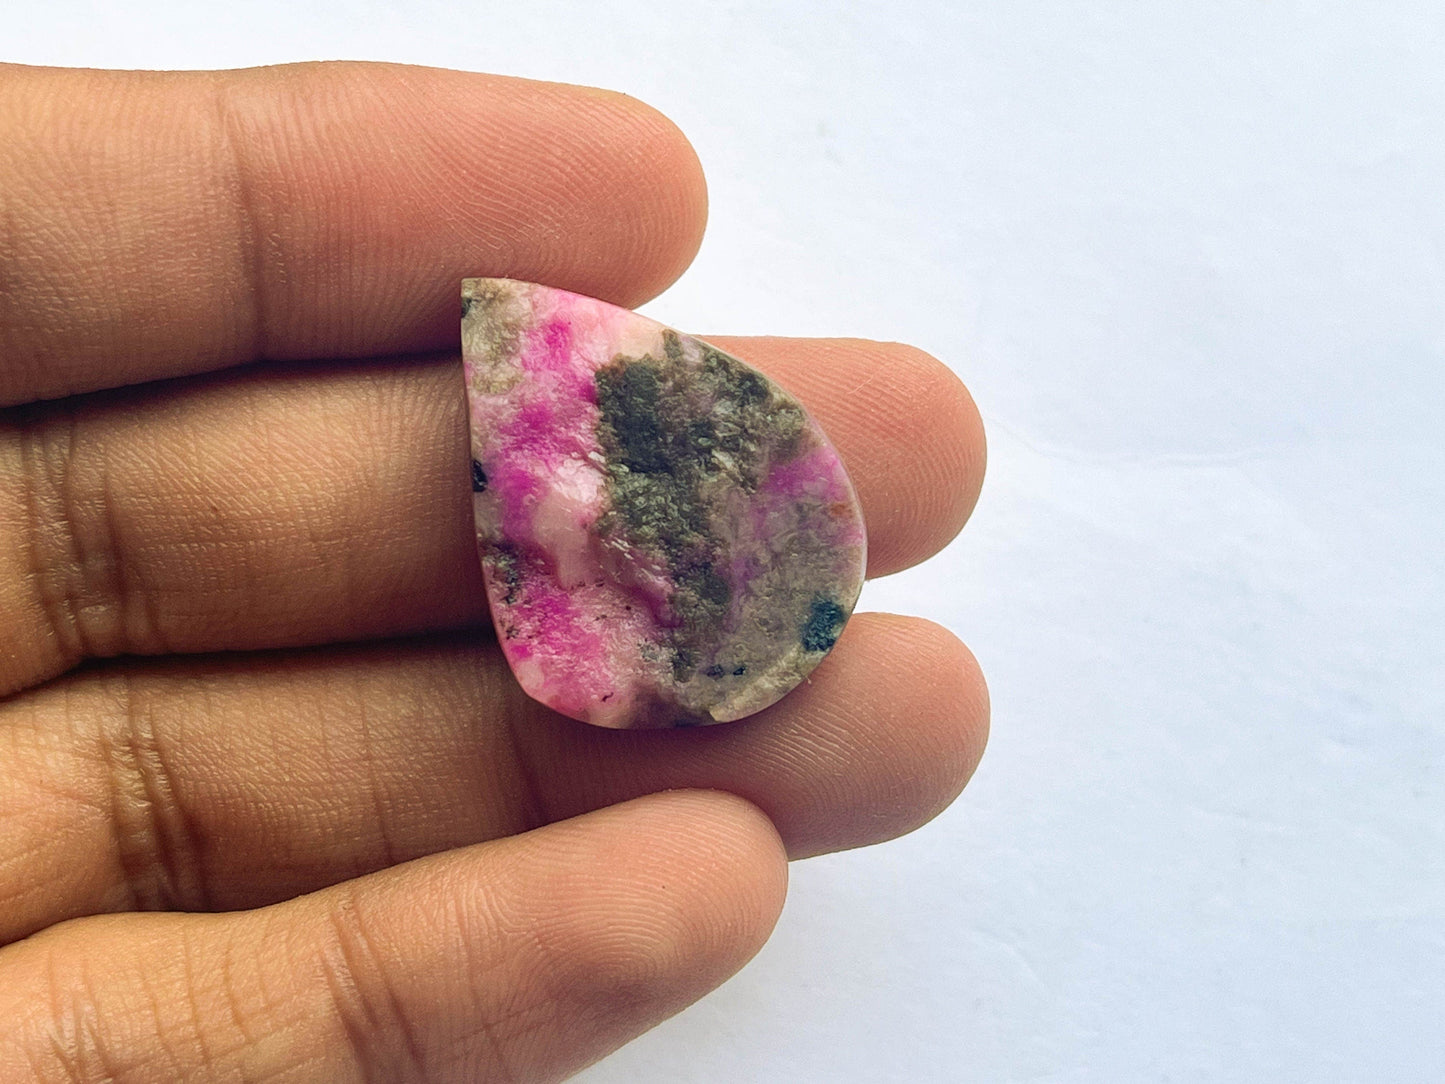 AAA Quality pink cobalto calcite Druzy Cabochons, Natural pink cobalto Druzy Cabochons, Top Quality handmade Cabochons 100%Natural BFYJ107-4 Beadsforyourjewelry